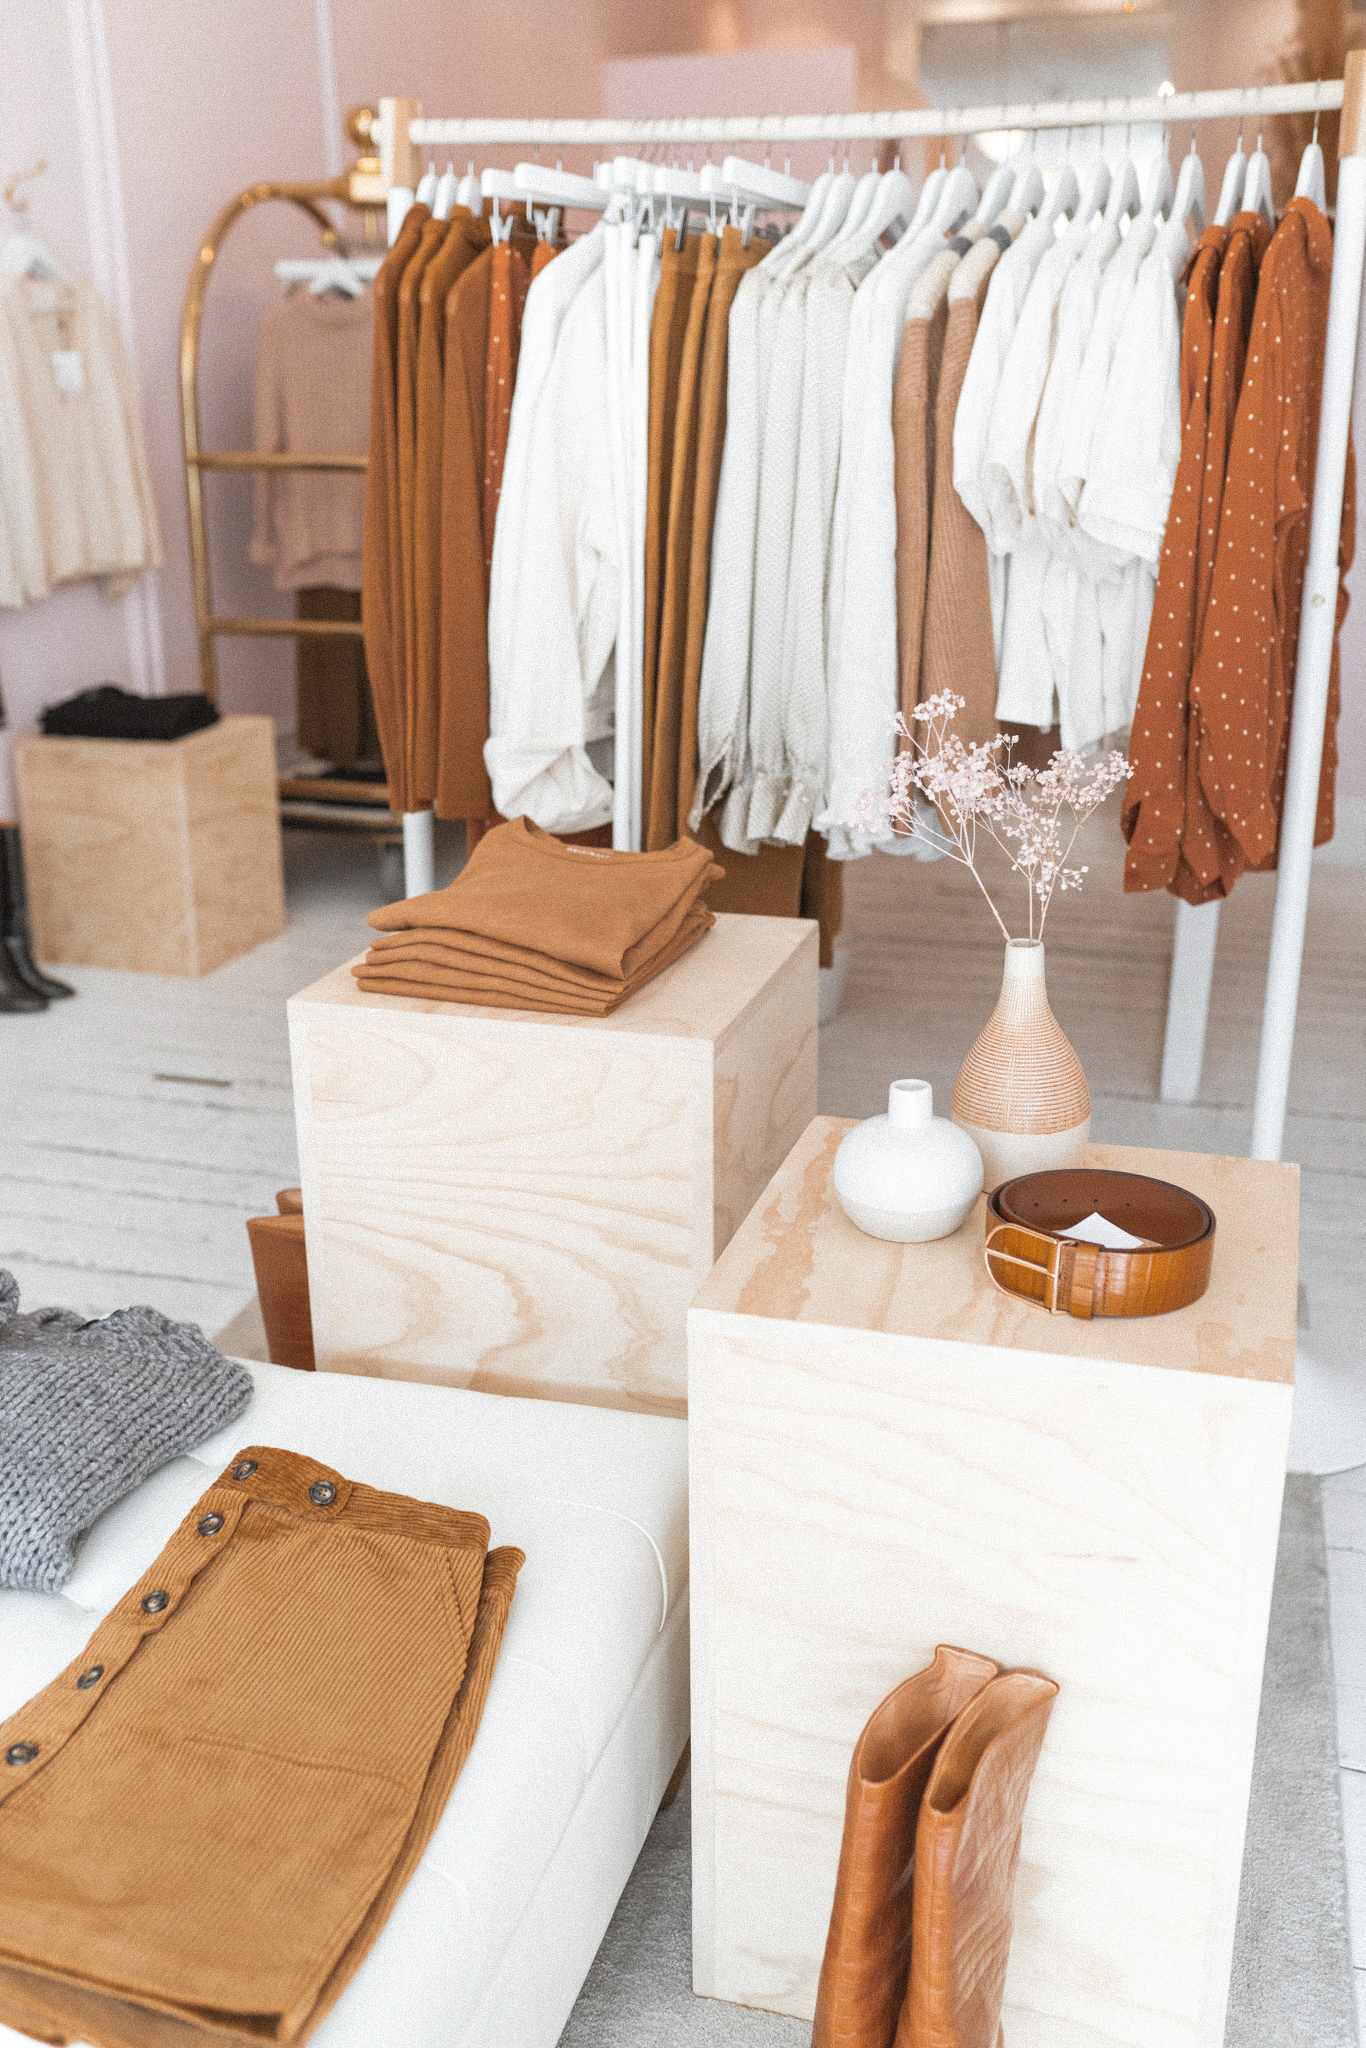 Store setting with fall colored clothing, warm tones